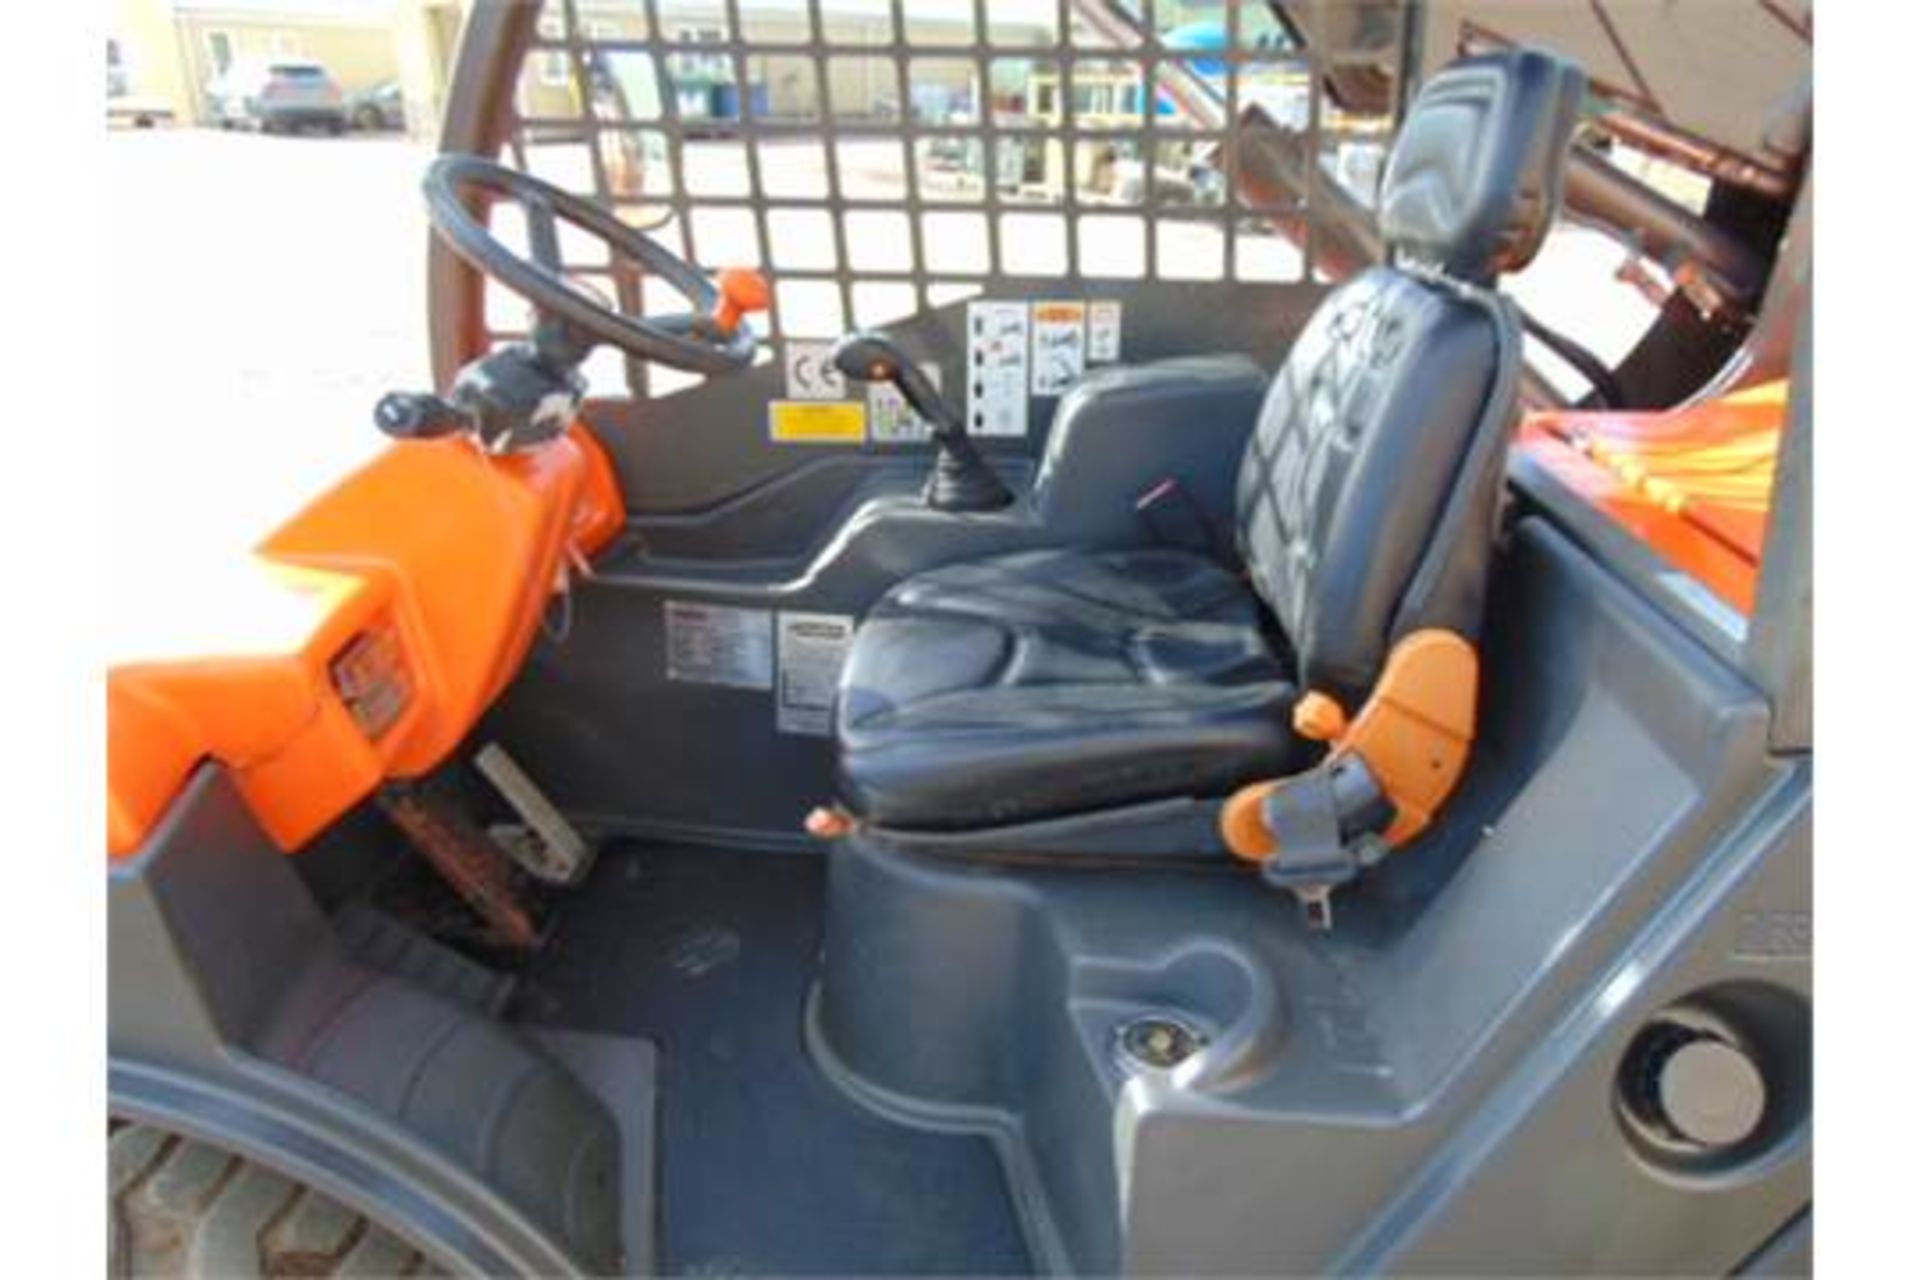 2010 Ausa Taurulift T133H 4WD Compact Forklift with Pallet Tines - Image 17 of 23